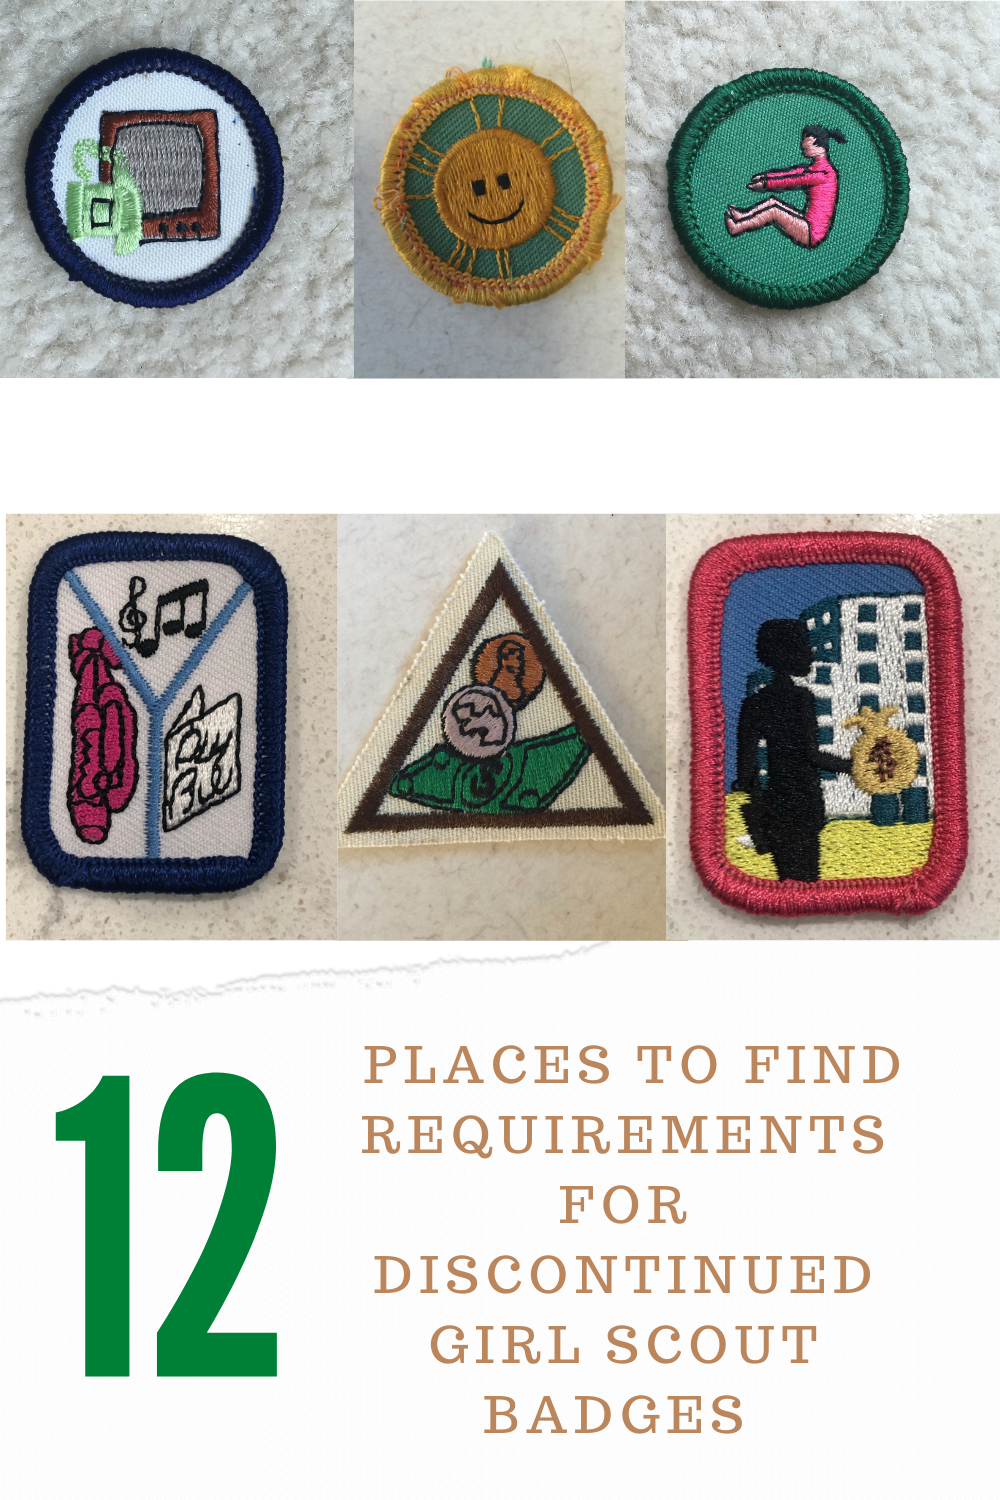 CONSERVATION 1960-62 ONLY Intermediate Girl Scout NEW Badge VOLUME DISCOUNT